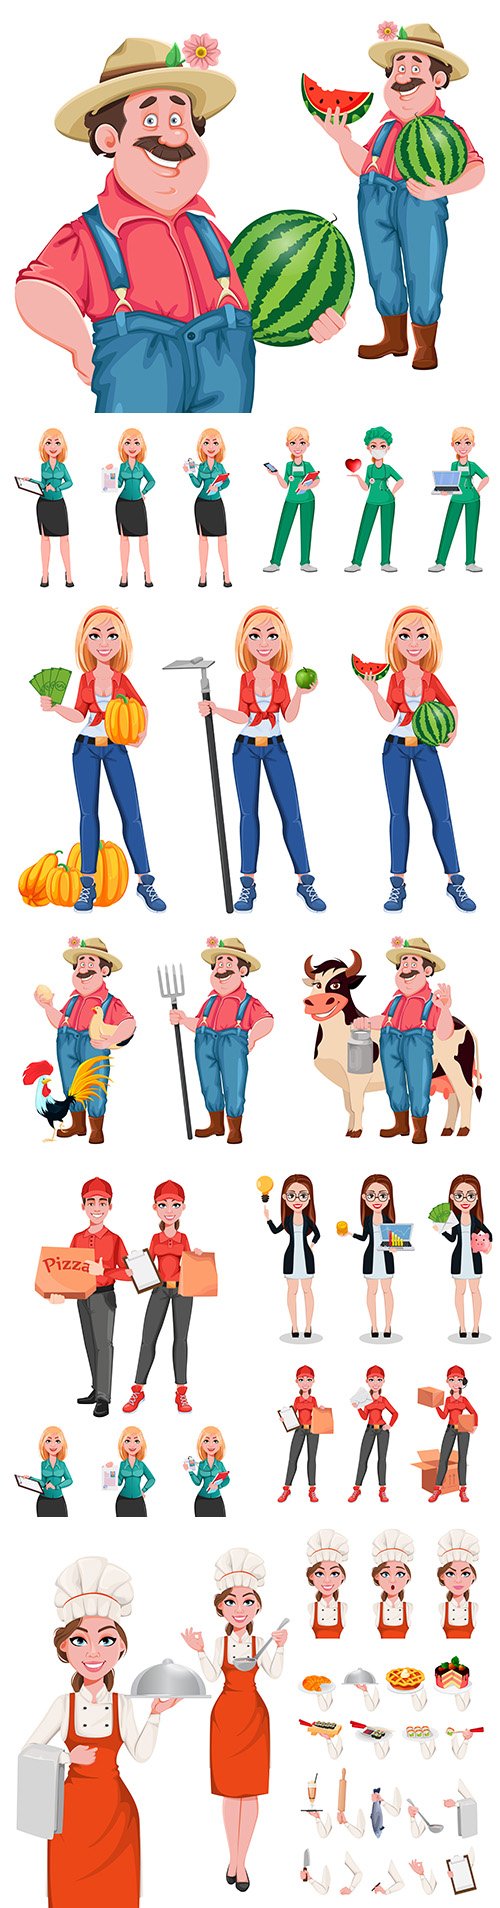 Business woman and man cartoon character of different professions